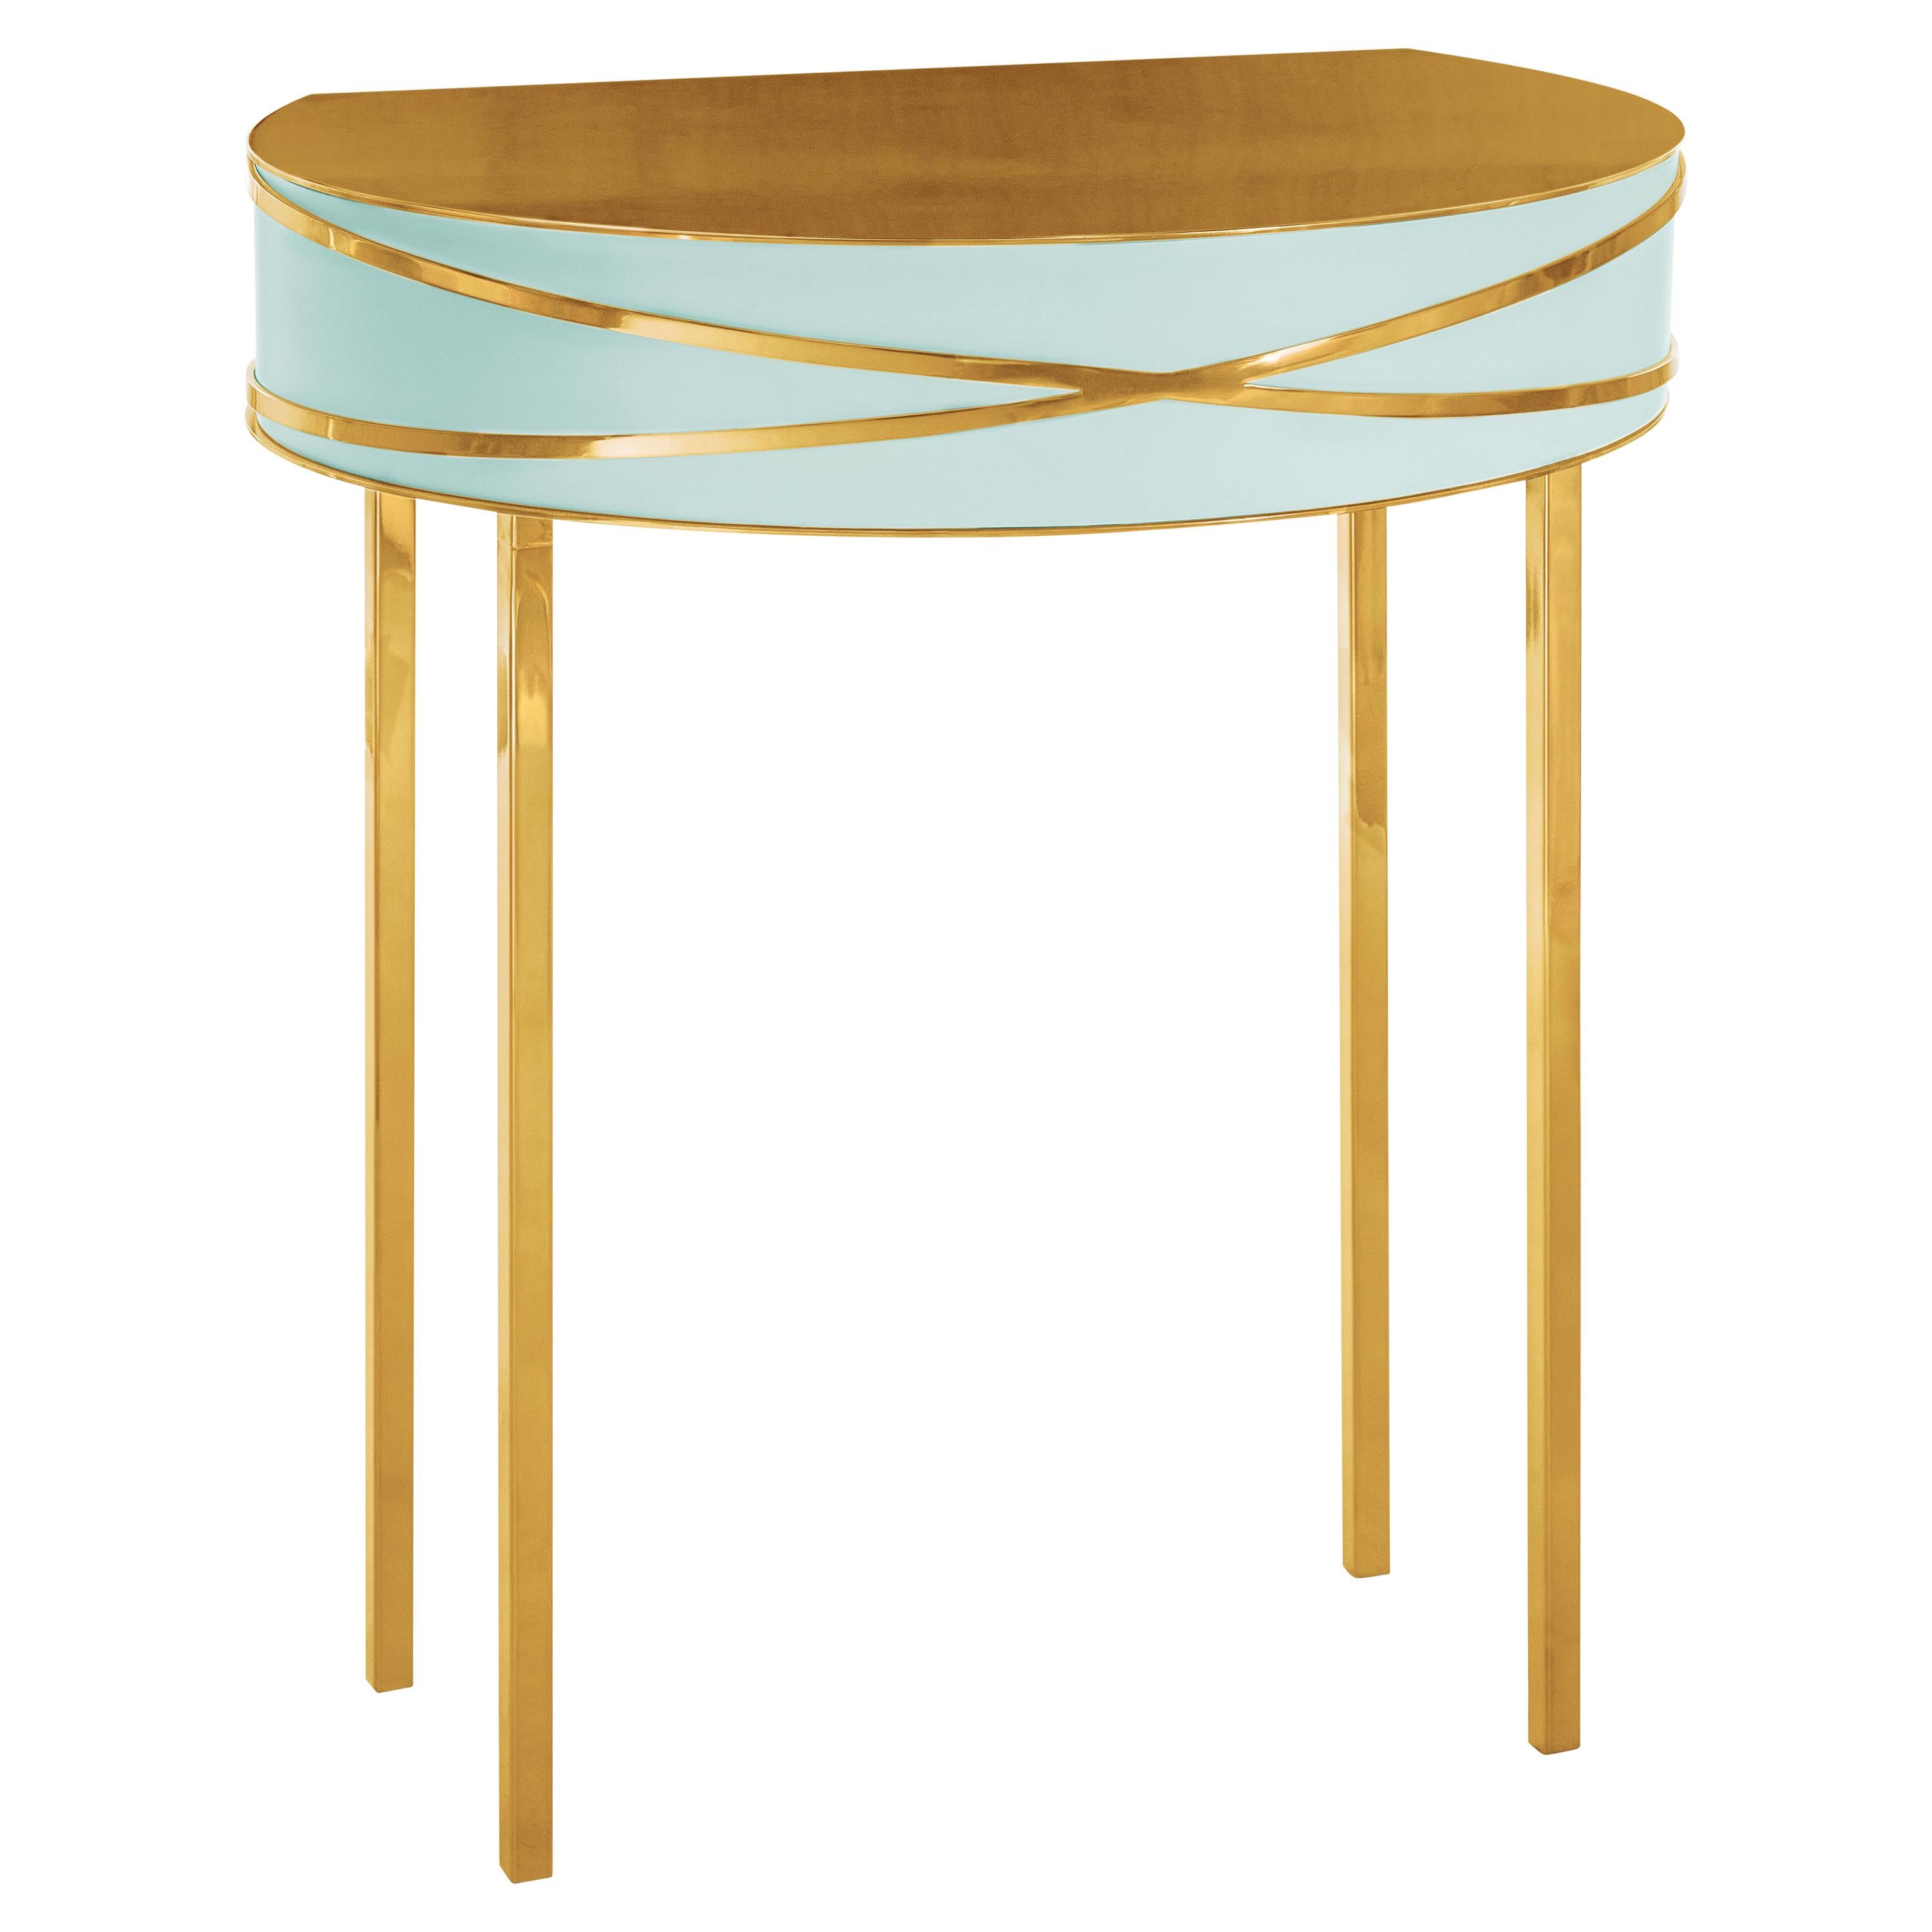 Stella Mint Green Console or Bedside Table with Gold Trims by Nika Zupanc For Sale